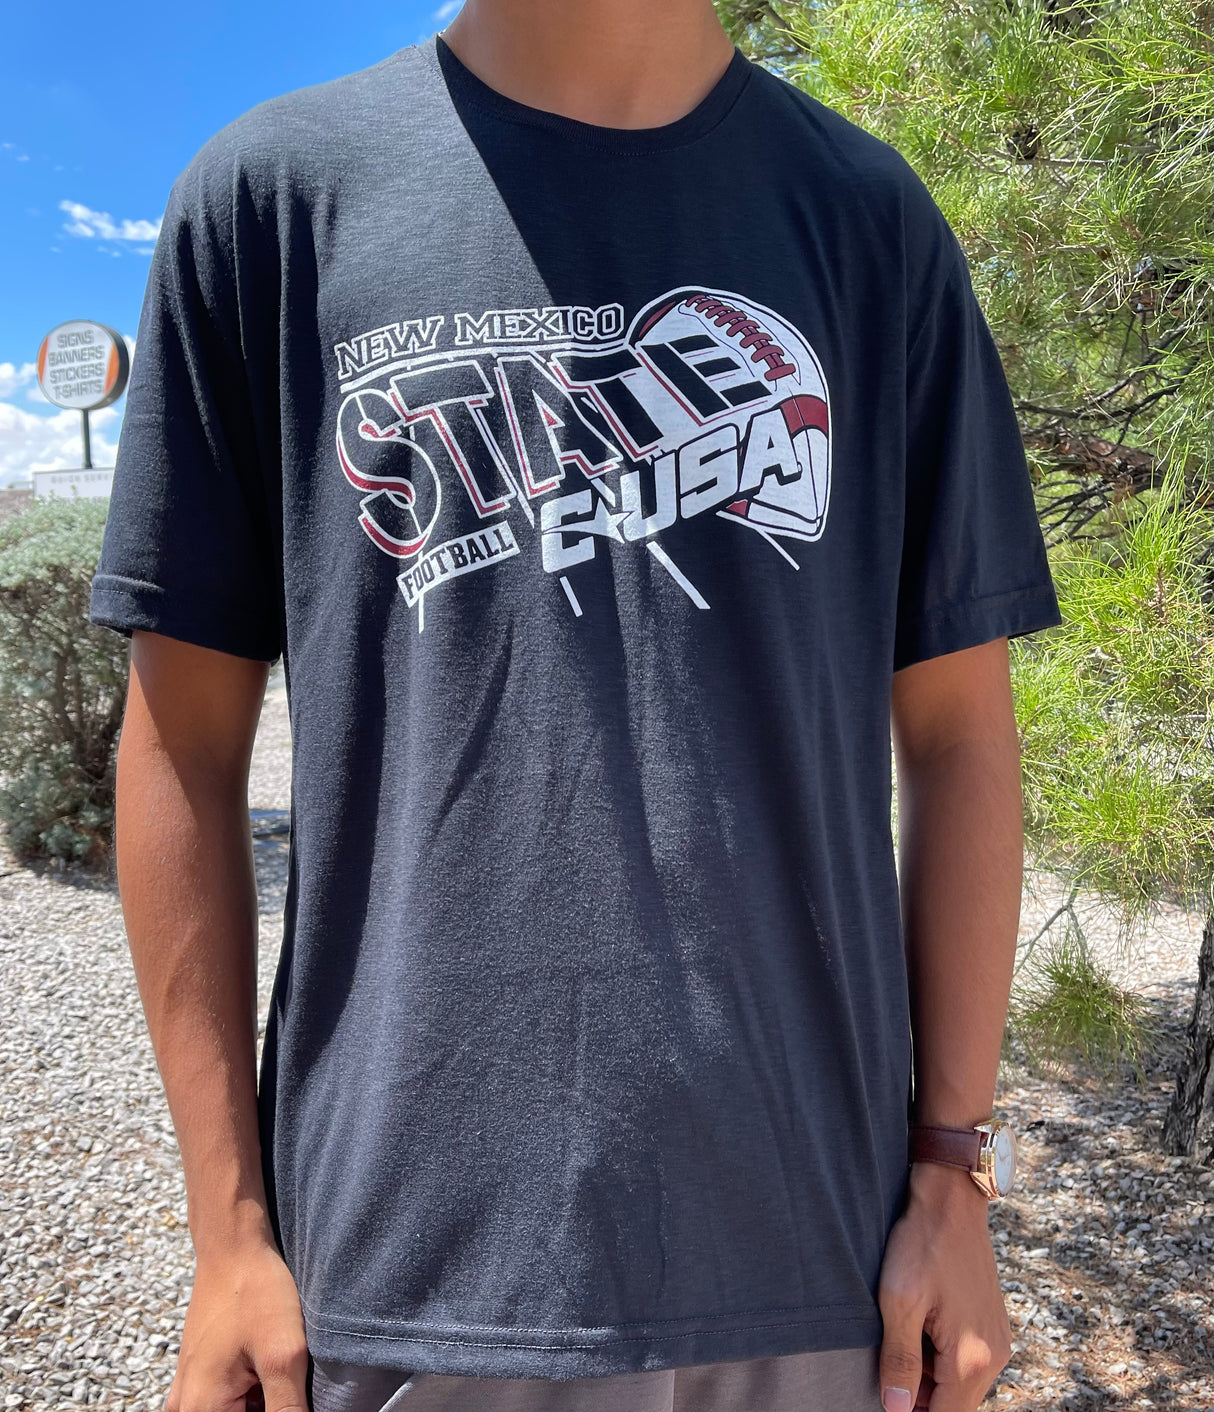 New Mexico State C USA Tee